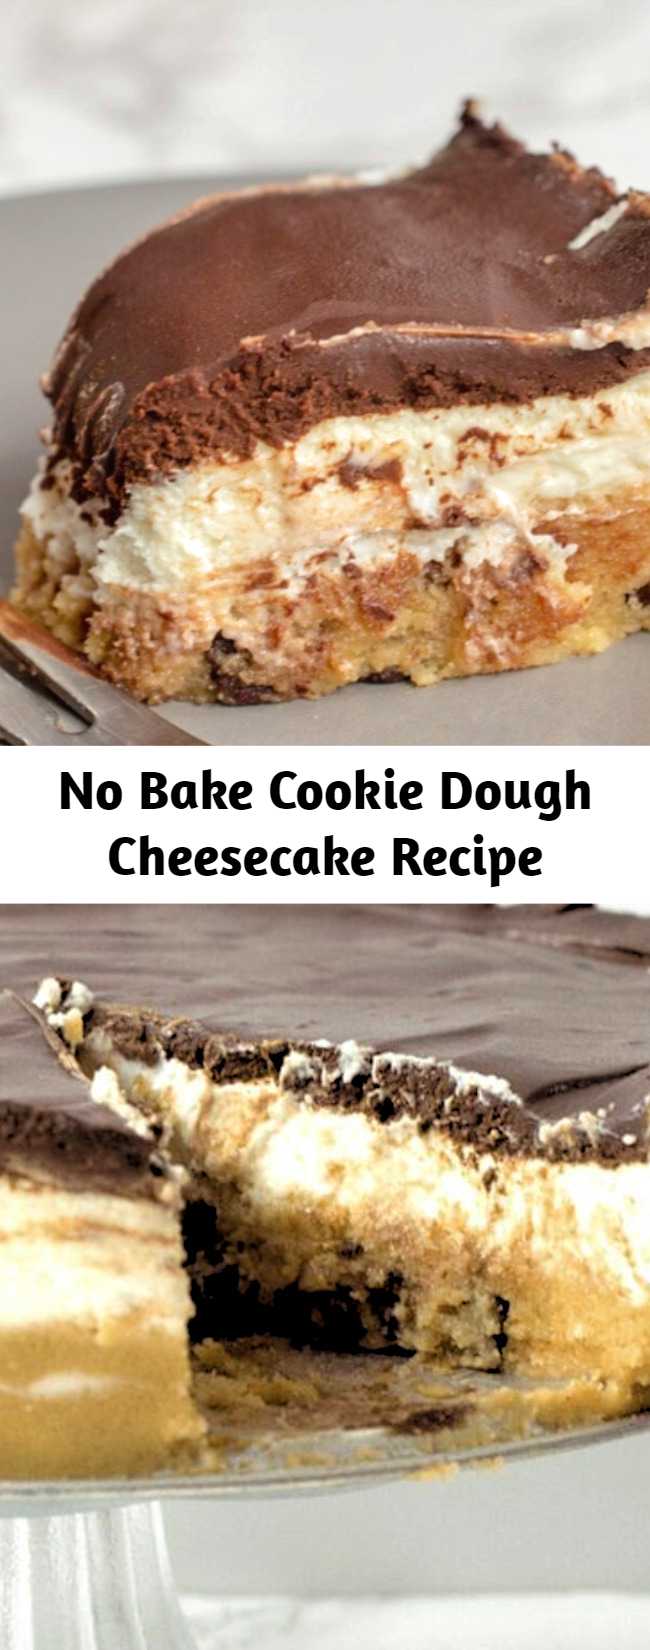 With a layer of raw chocolate chip cookie dough, a layer of creamy cheesecake, and a layer of rich chocolate ganache my No-Bake Cookie Dough Cheesecake may be the best dessert ever. This easy recipe is low carb, keto, gluten-free, grain-free, sugar-free, and Trim Healthy Mama friendly. #lowcarb #lowcarbrecipes #lowcarbdiet #keto #ketorecipes #ketodiet #thm #trimhealthymama #glutenfree #grainfree #glutenfreerecipes #recipes #cheesecake #nobake #desserts #dessertrecipes #ketodessert #lowcarbdessert